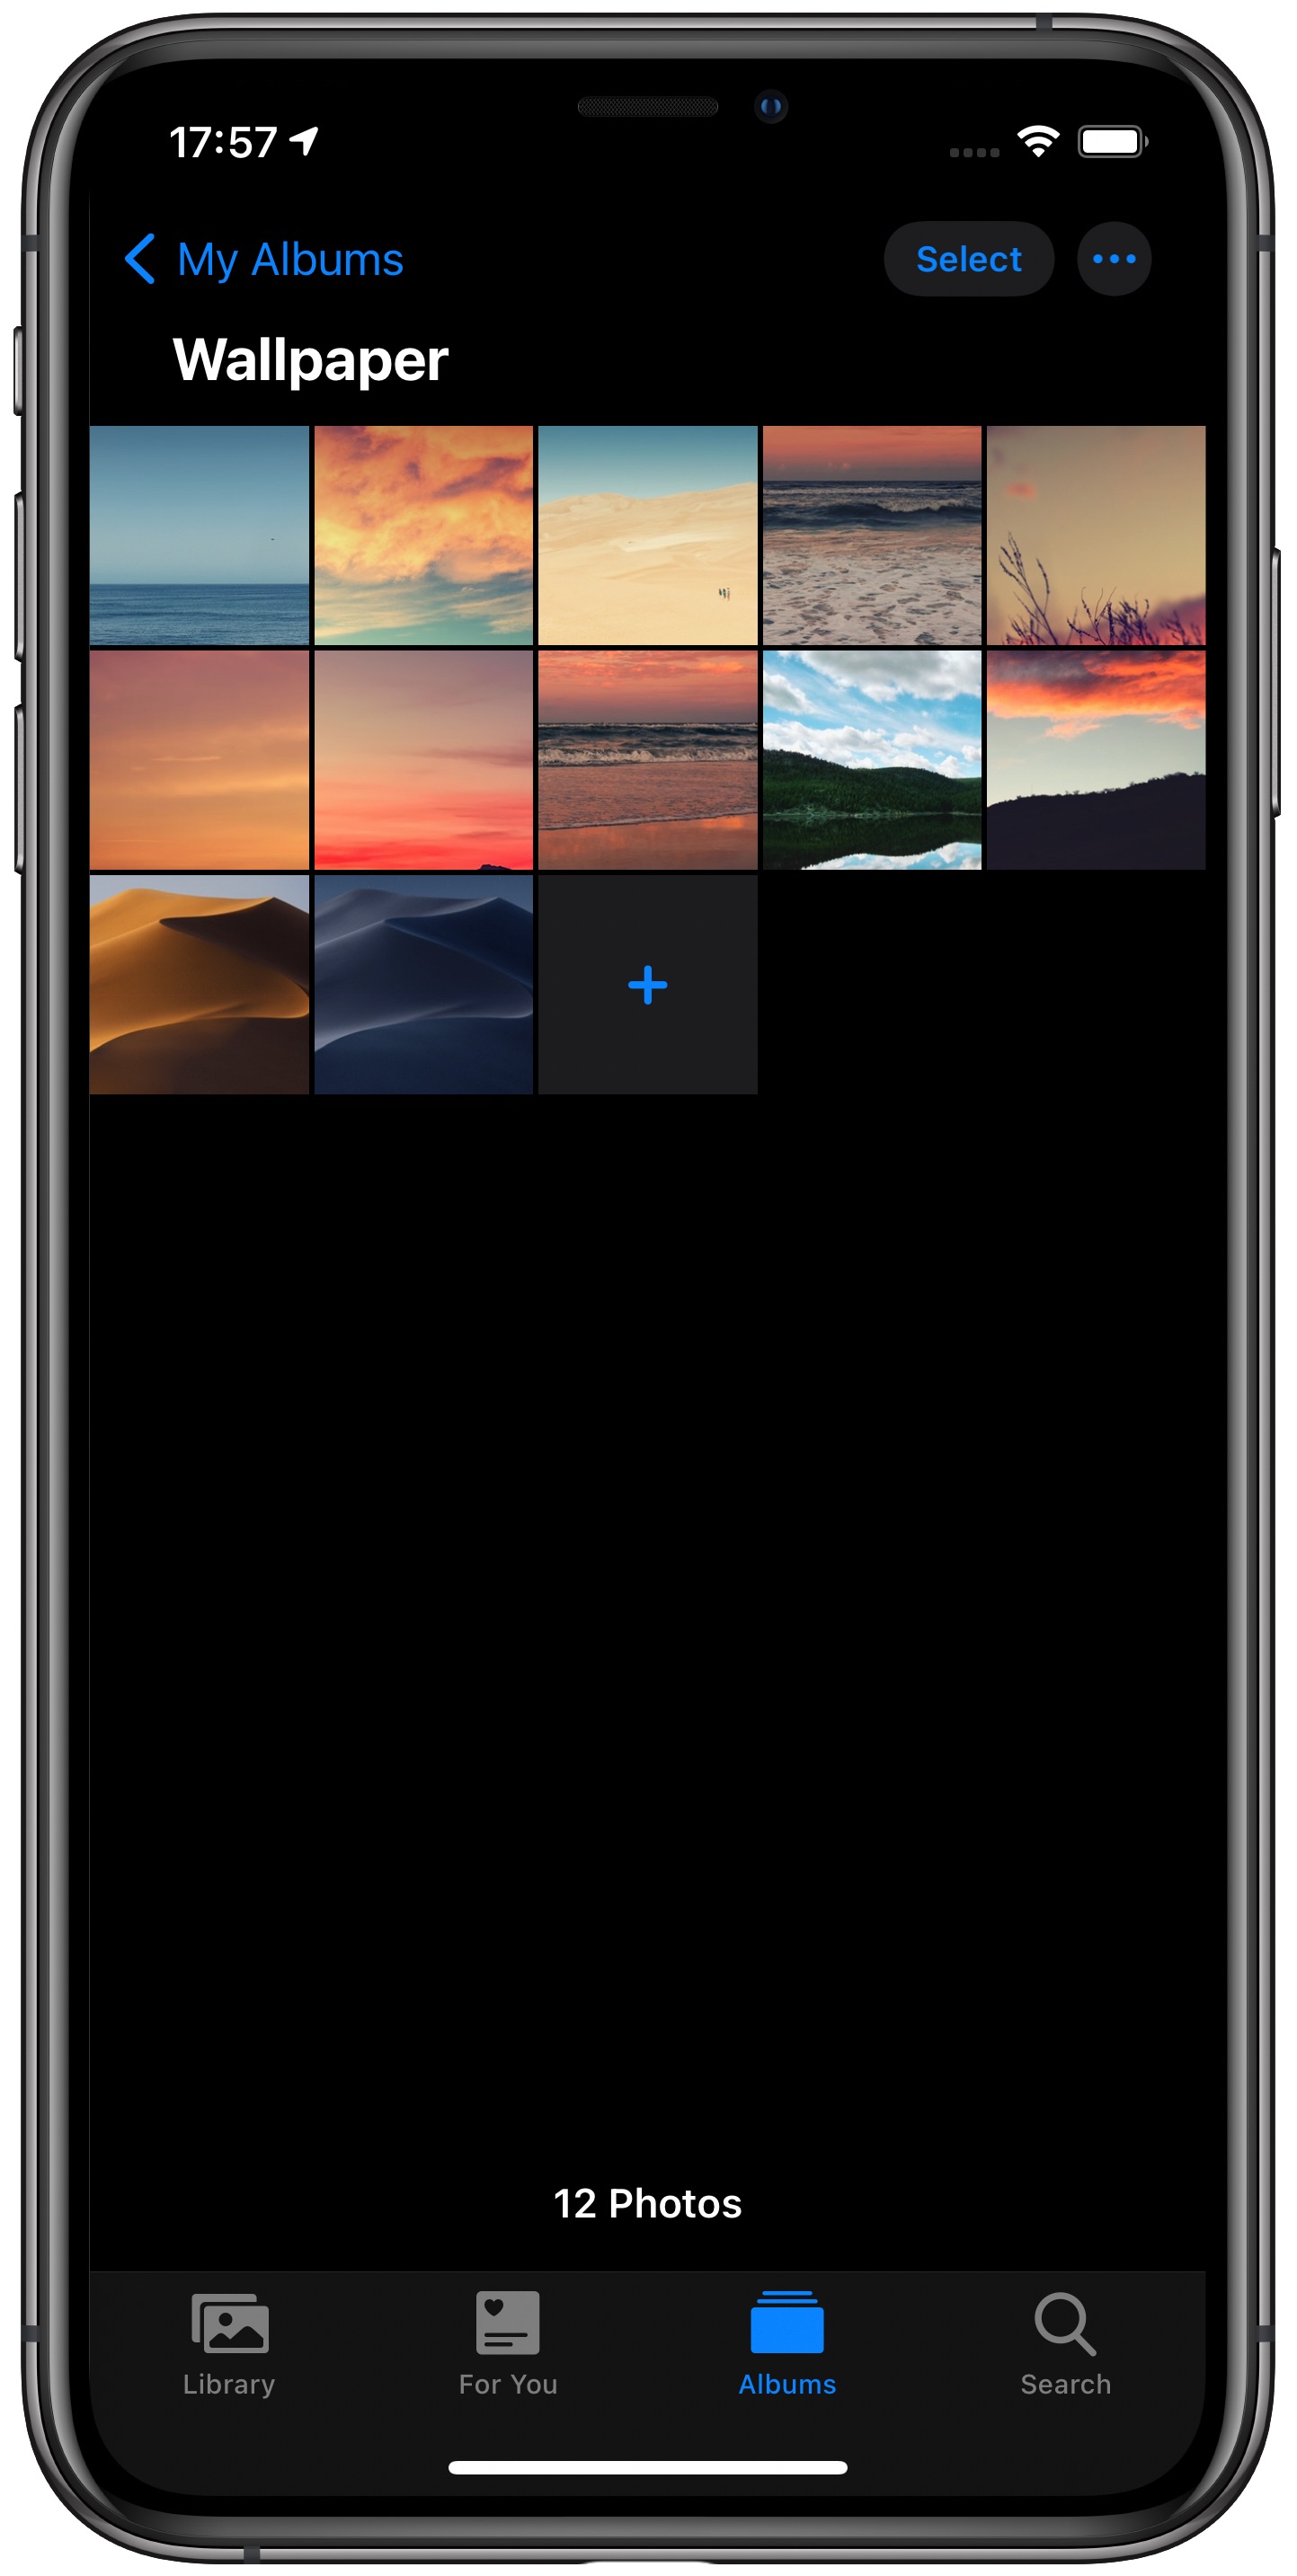 change iPhone wallpaper automatically - Photos app with Wallpaper album